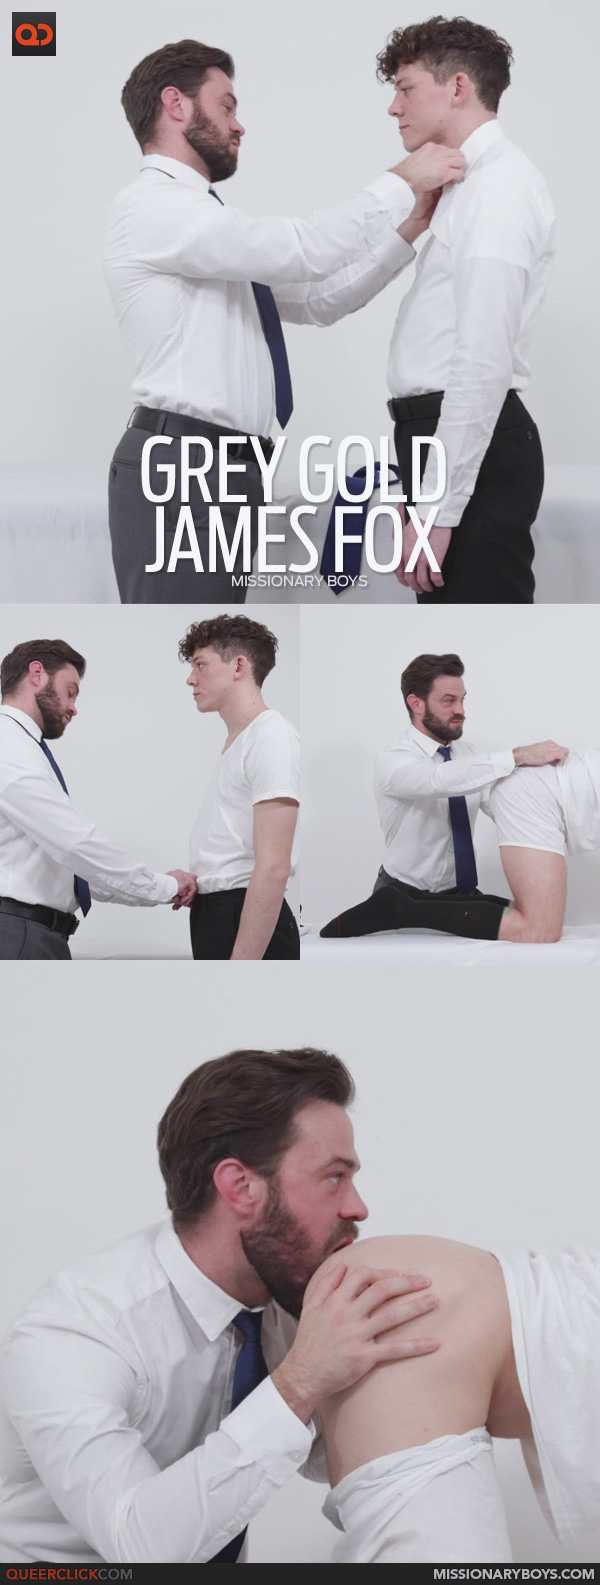 Say Uncle | Missionary Boys: Grey Gold and James Fox